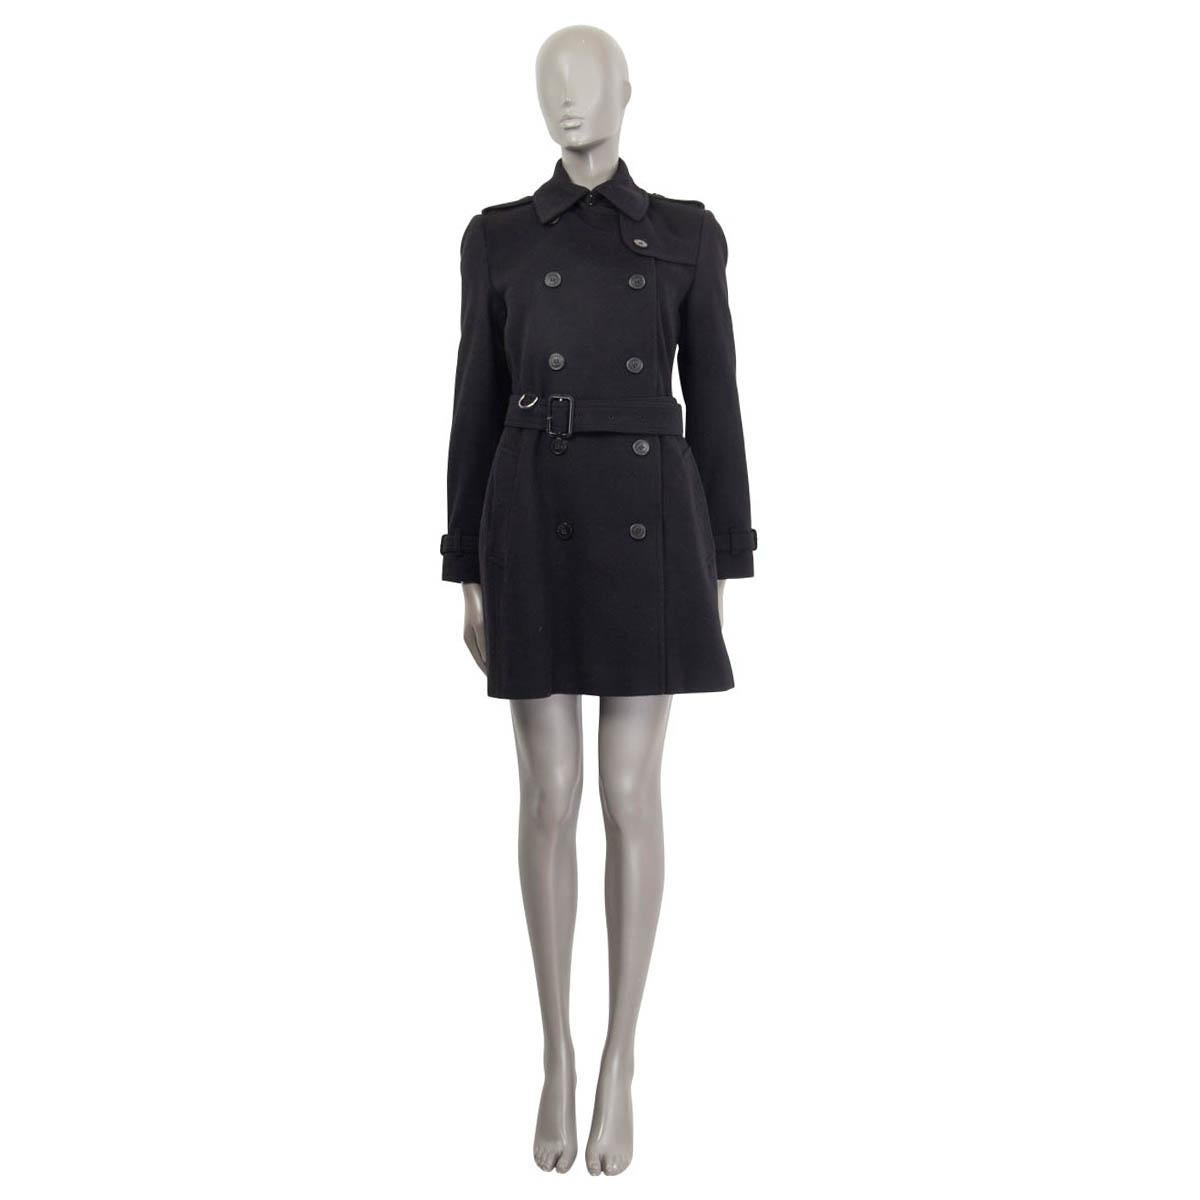 100% authentic Burberry 'Kensington' double breasted trench coat in black virgin wool (80%) and cashmere (20%). Embellished with epaulettes on the shoulders and comes with a belt. Opens with a concealed hook on the neck and seven buttons on the